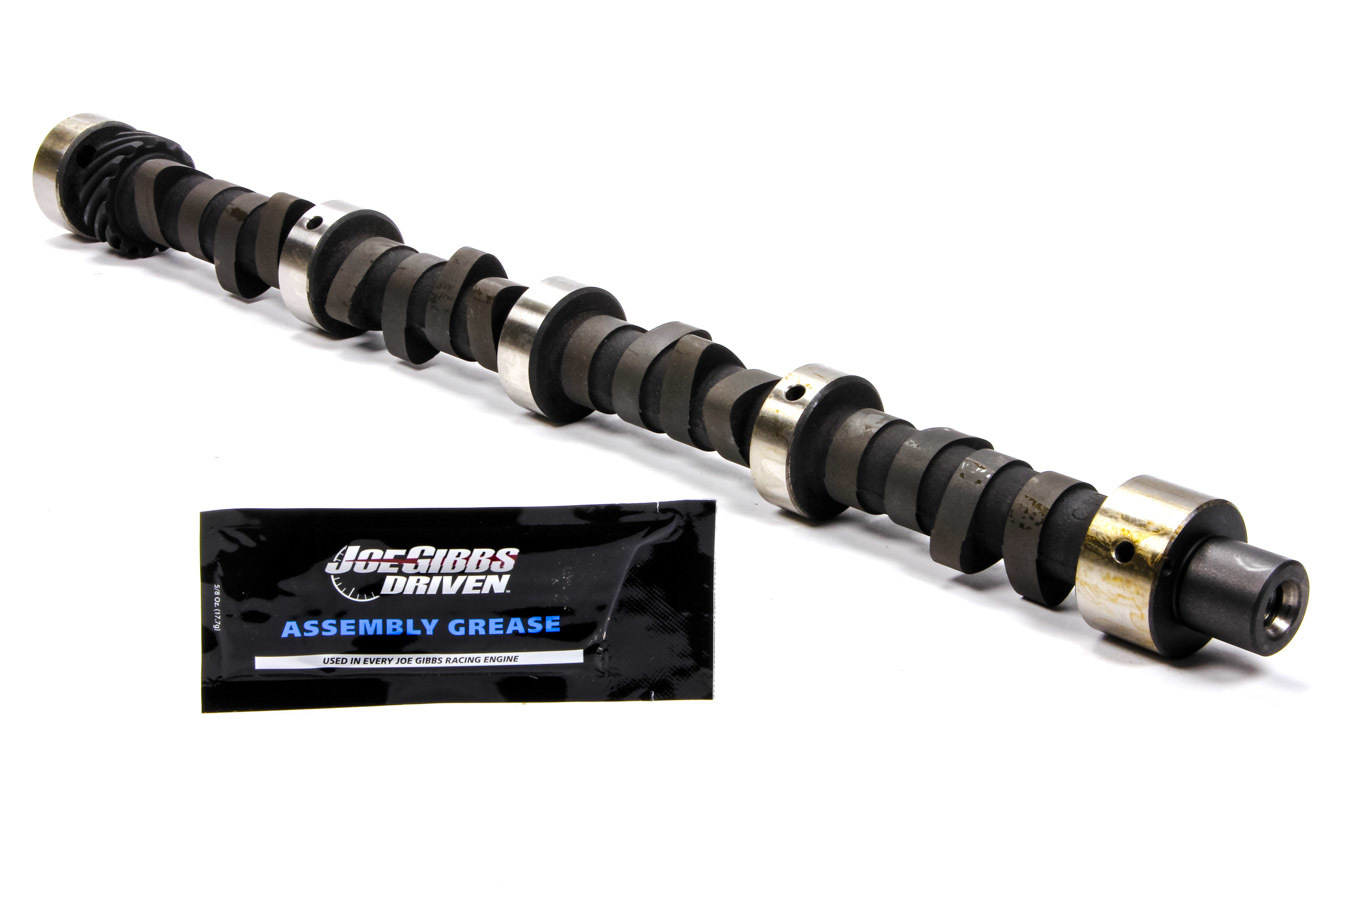 Crower Cams 60916 Camshaft, Power Beast, Hydraulic Flat Tappet, Lift 0.455 / 0.470 in, Duration 278 / 289, 112 LSA, 2000 / 4800 RPM, Pontiac V8, Each